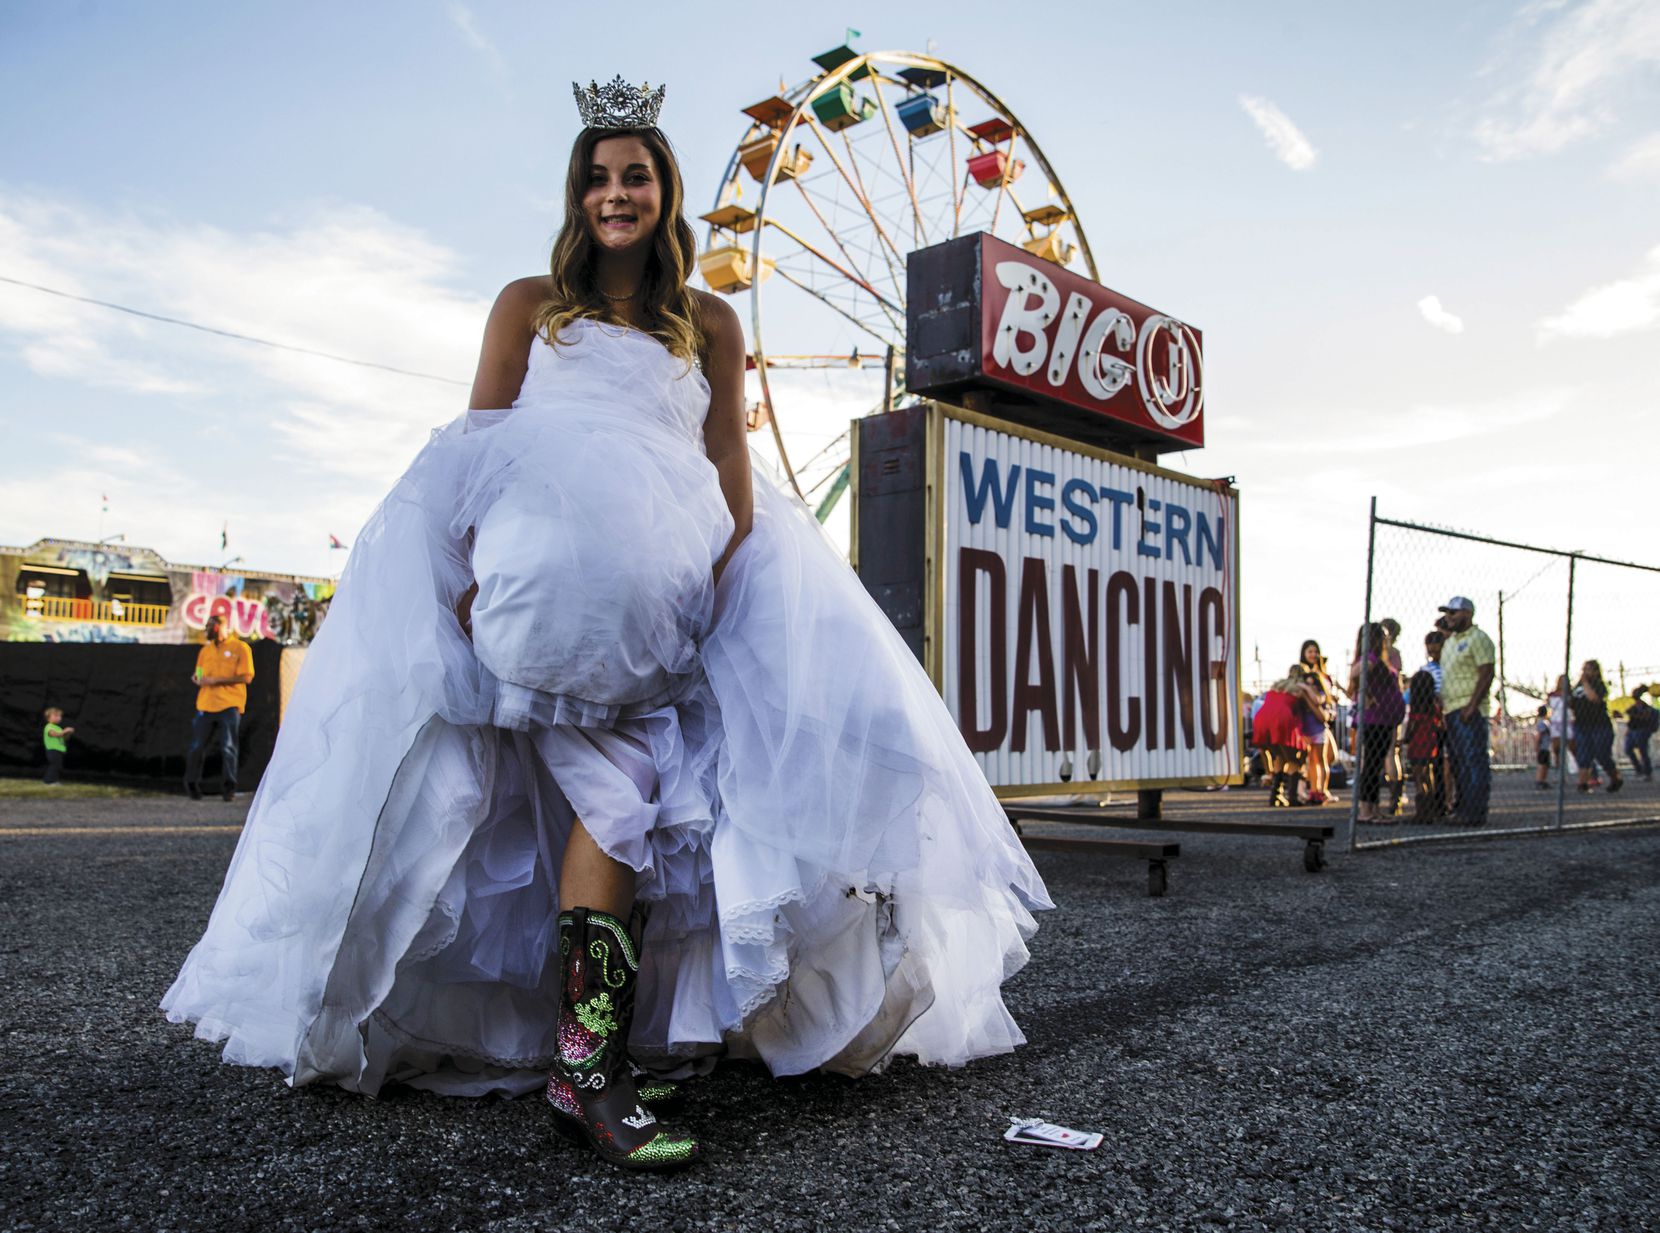 Lexi Carter, the Luling Watermelon Thump Queen 2016, shows off her custom-made cowboy boots after the coronation of the 2017 queen. The pageant is held at the Thump Pavilion.